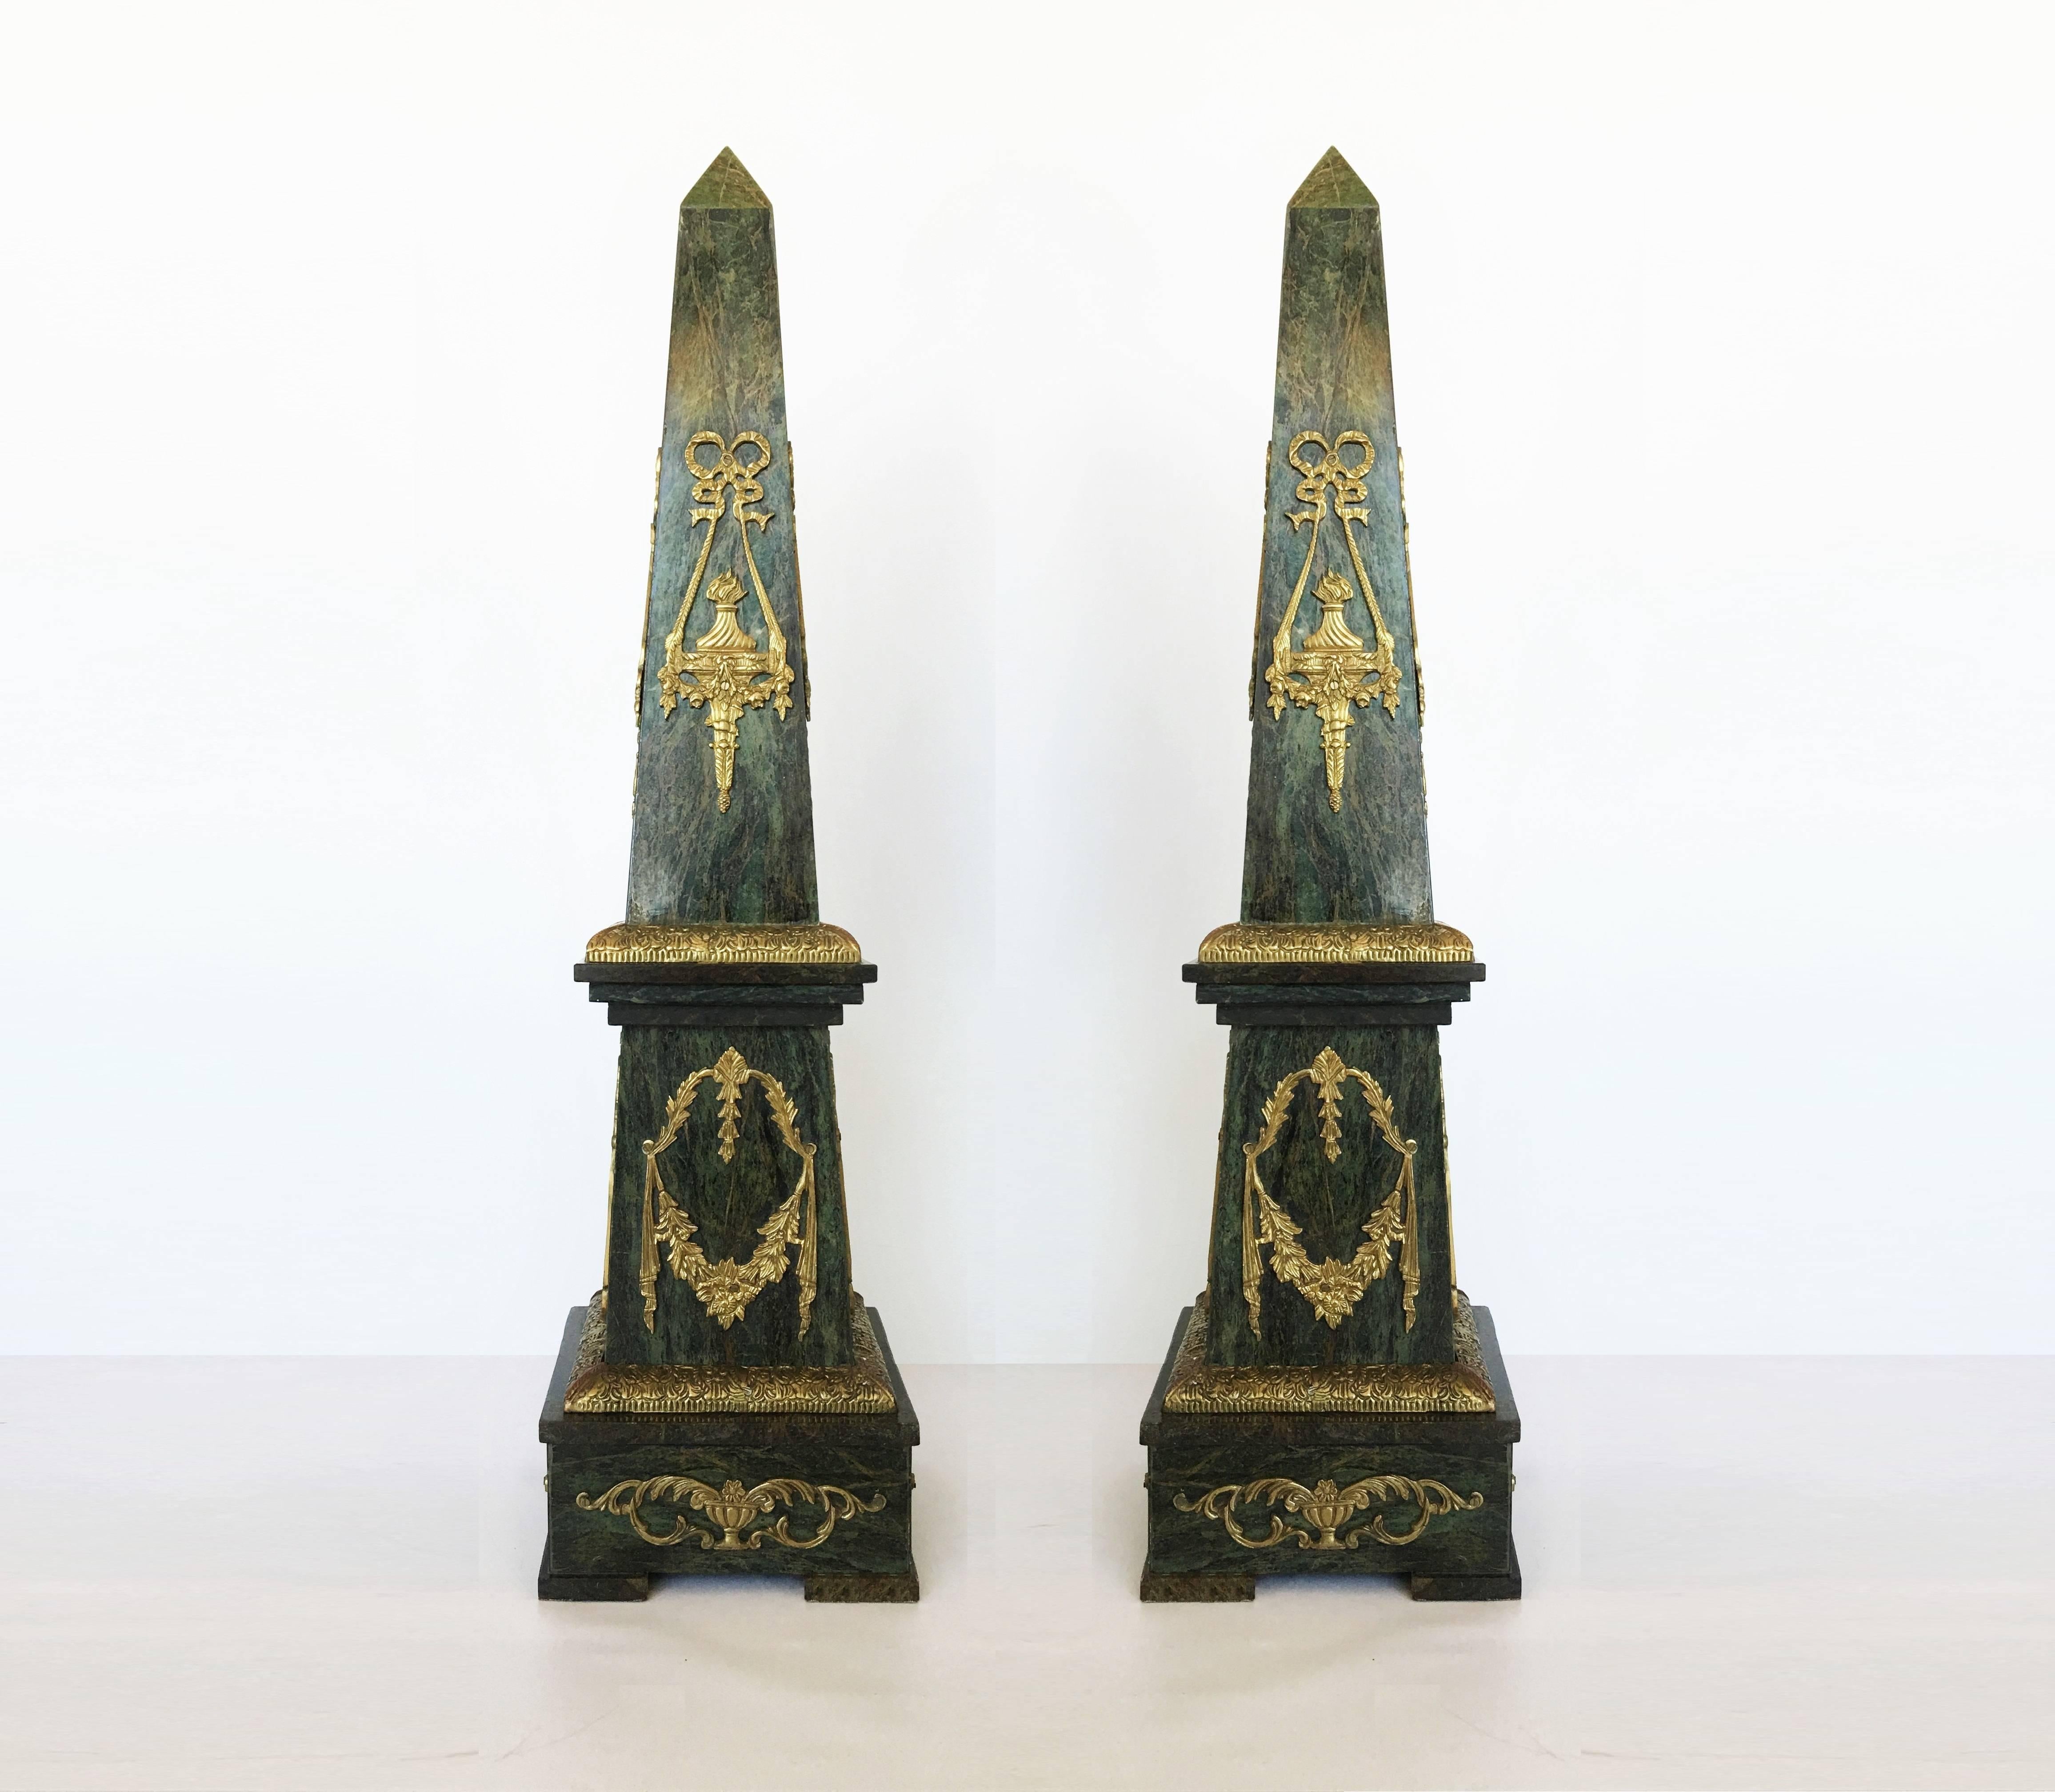 Colossal pair of green marble obelisks with bronze neoclassical style decorative mounts on all four sides. The upper section resembles torchieres, the central section has floral swags and the base has acanthus draped urns.